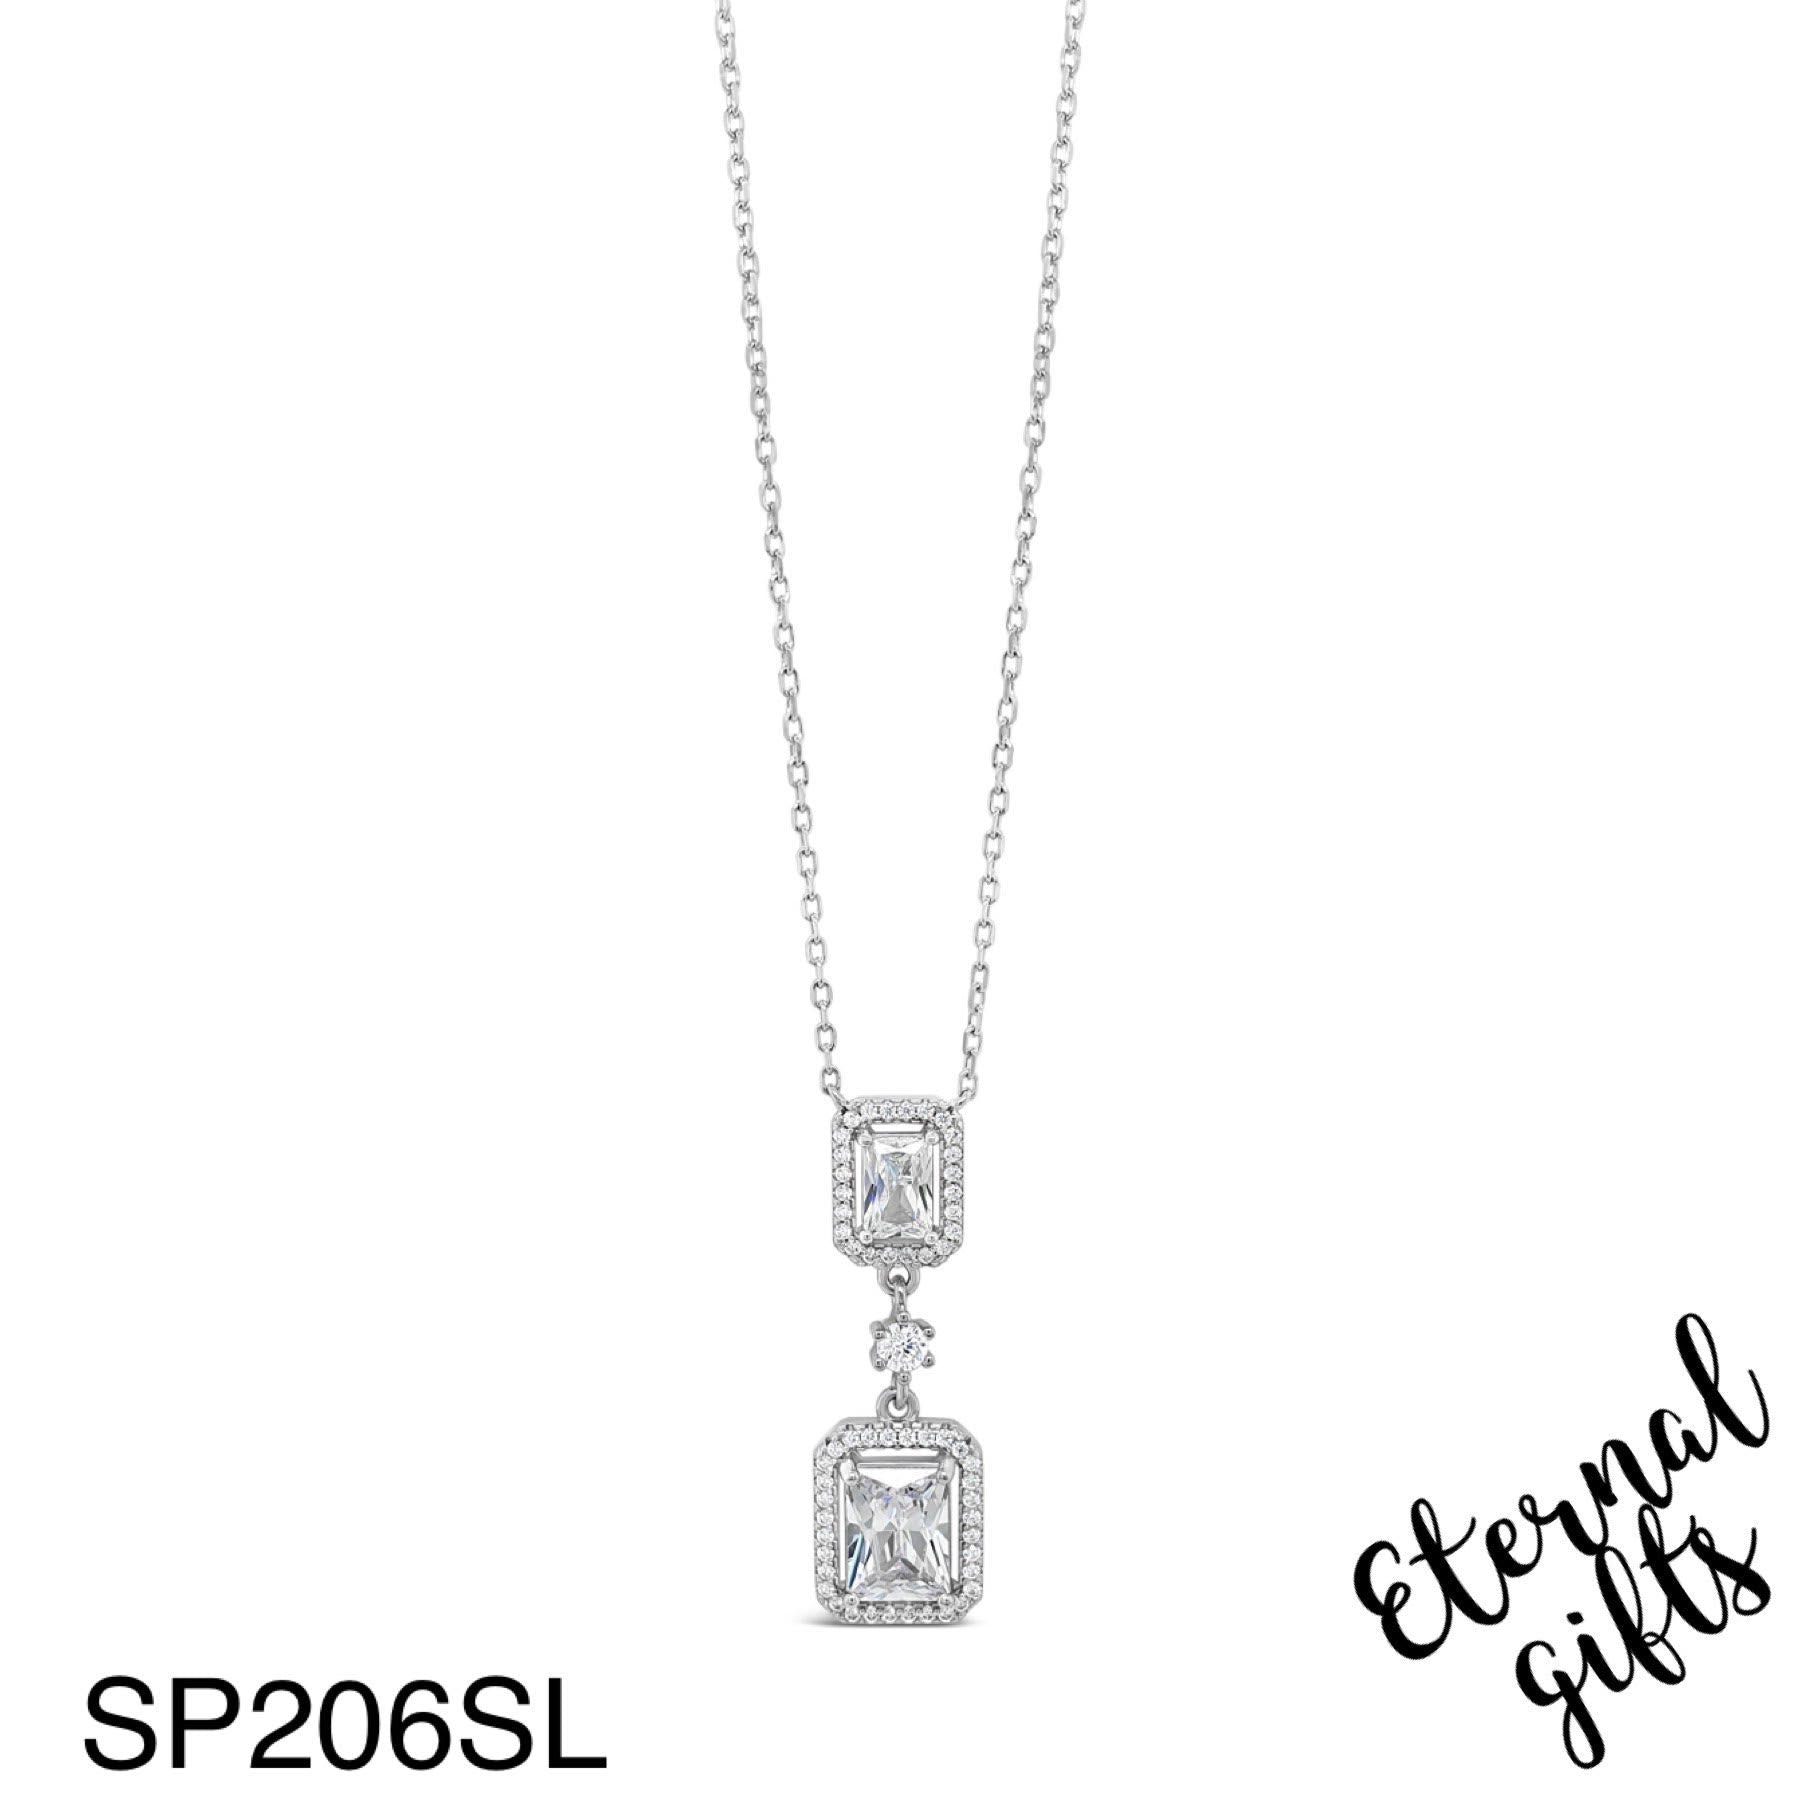 SP206SL Silver Pendant from The Glamour Collection - Silver by Absolute